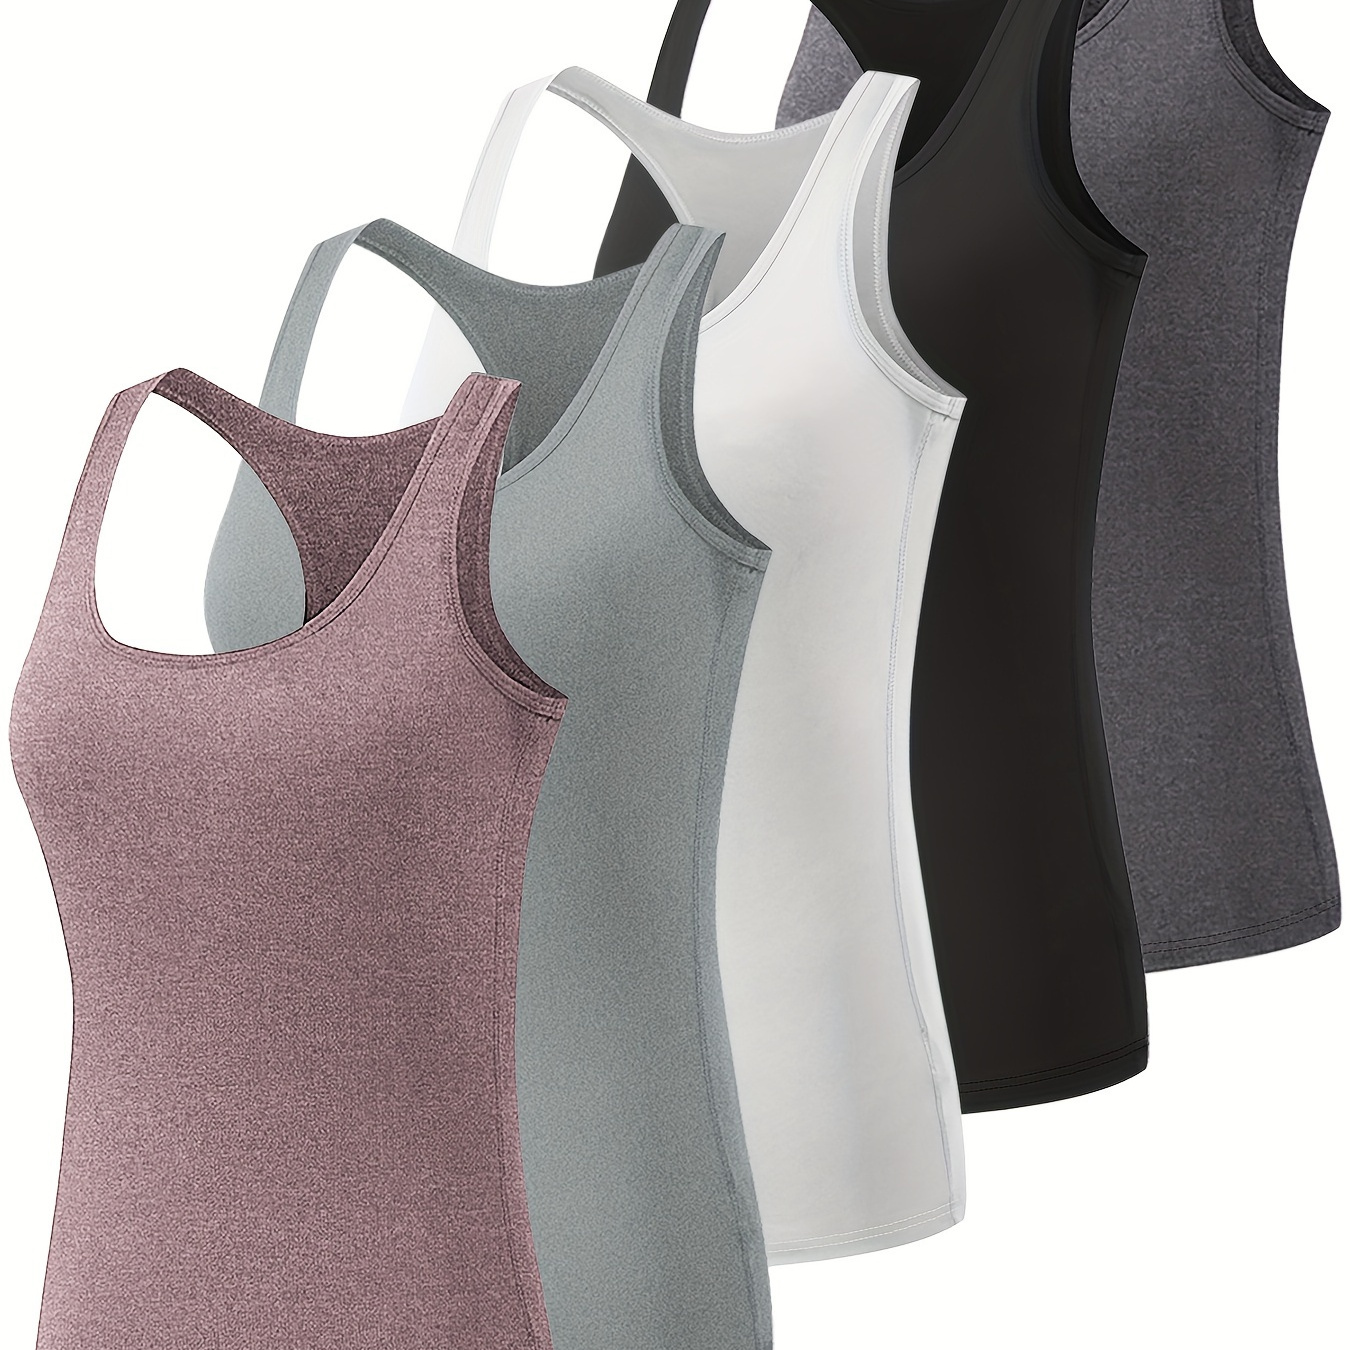 

5 Workout Tank Tops For Women, Athletic Racerback Sports Tank Tops, Compression Sleeveless Shirts, Order 1 Size Up For Perfect Fit